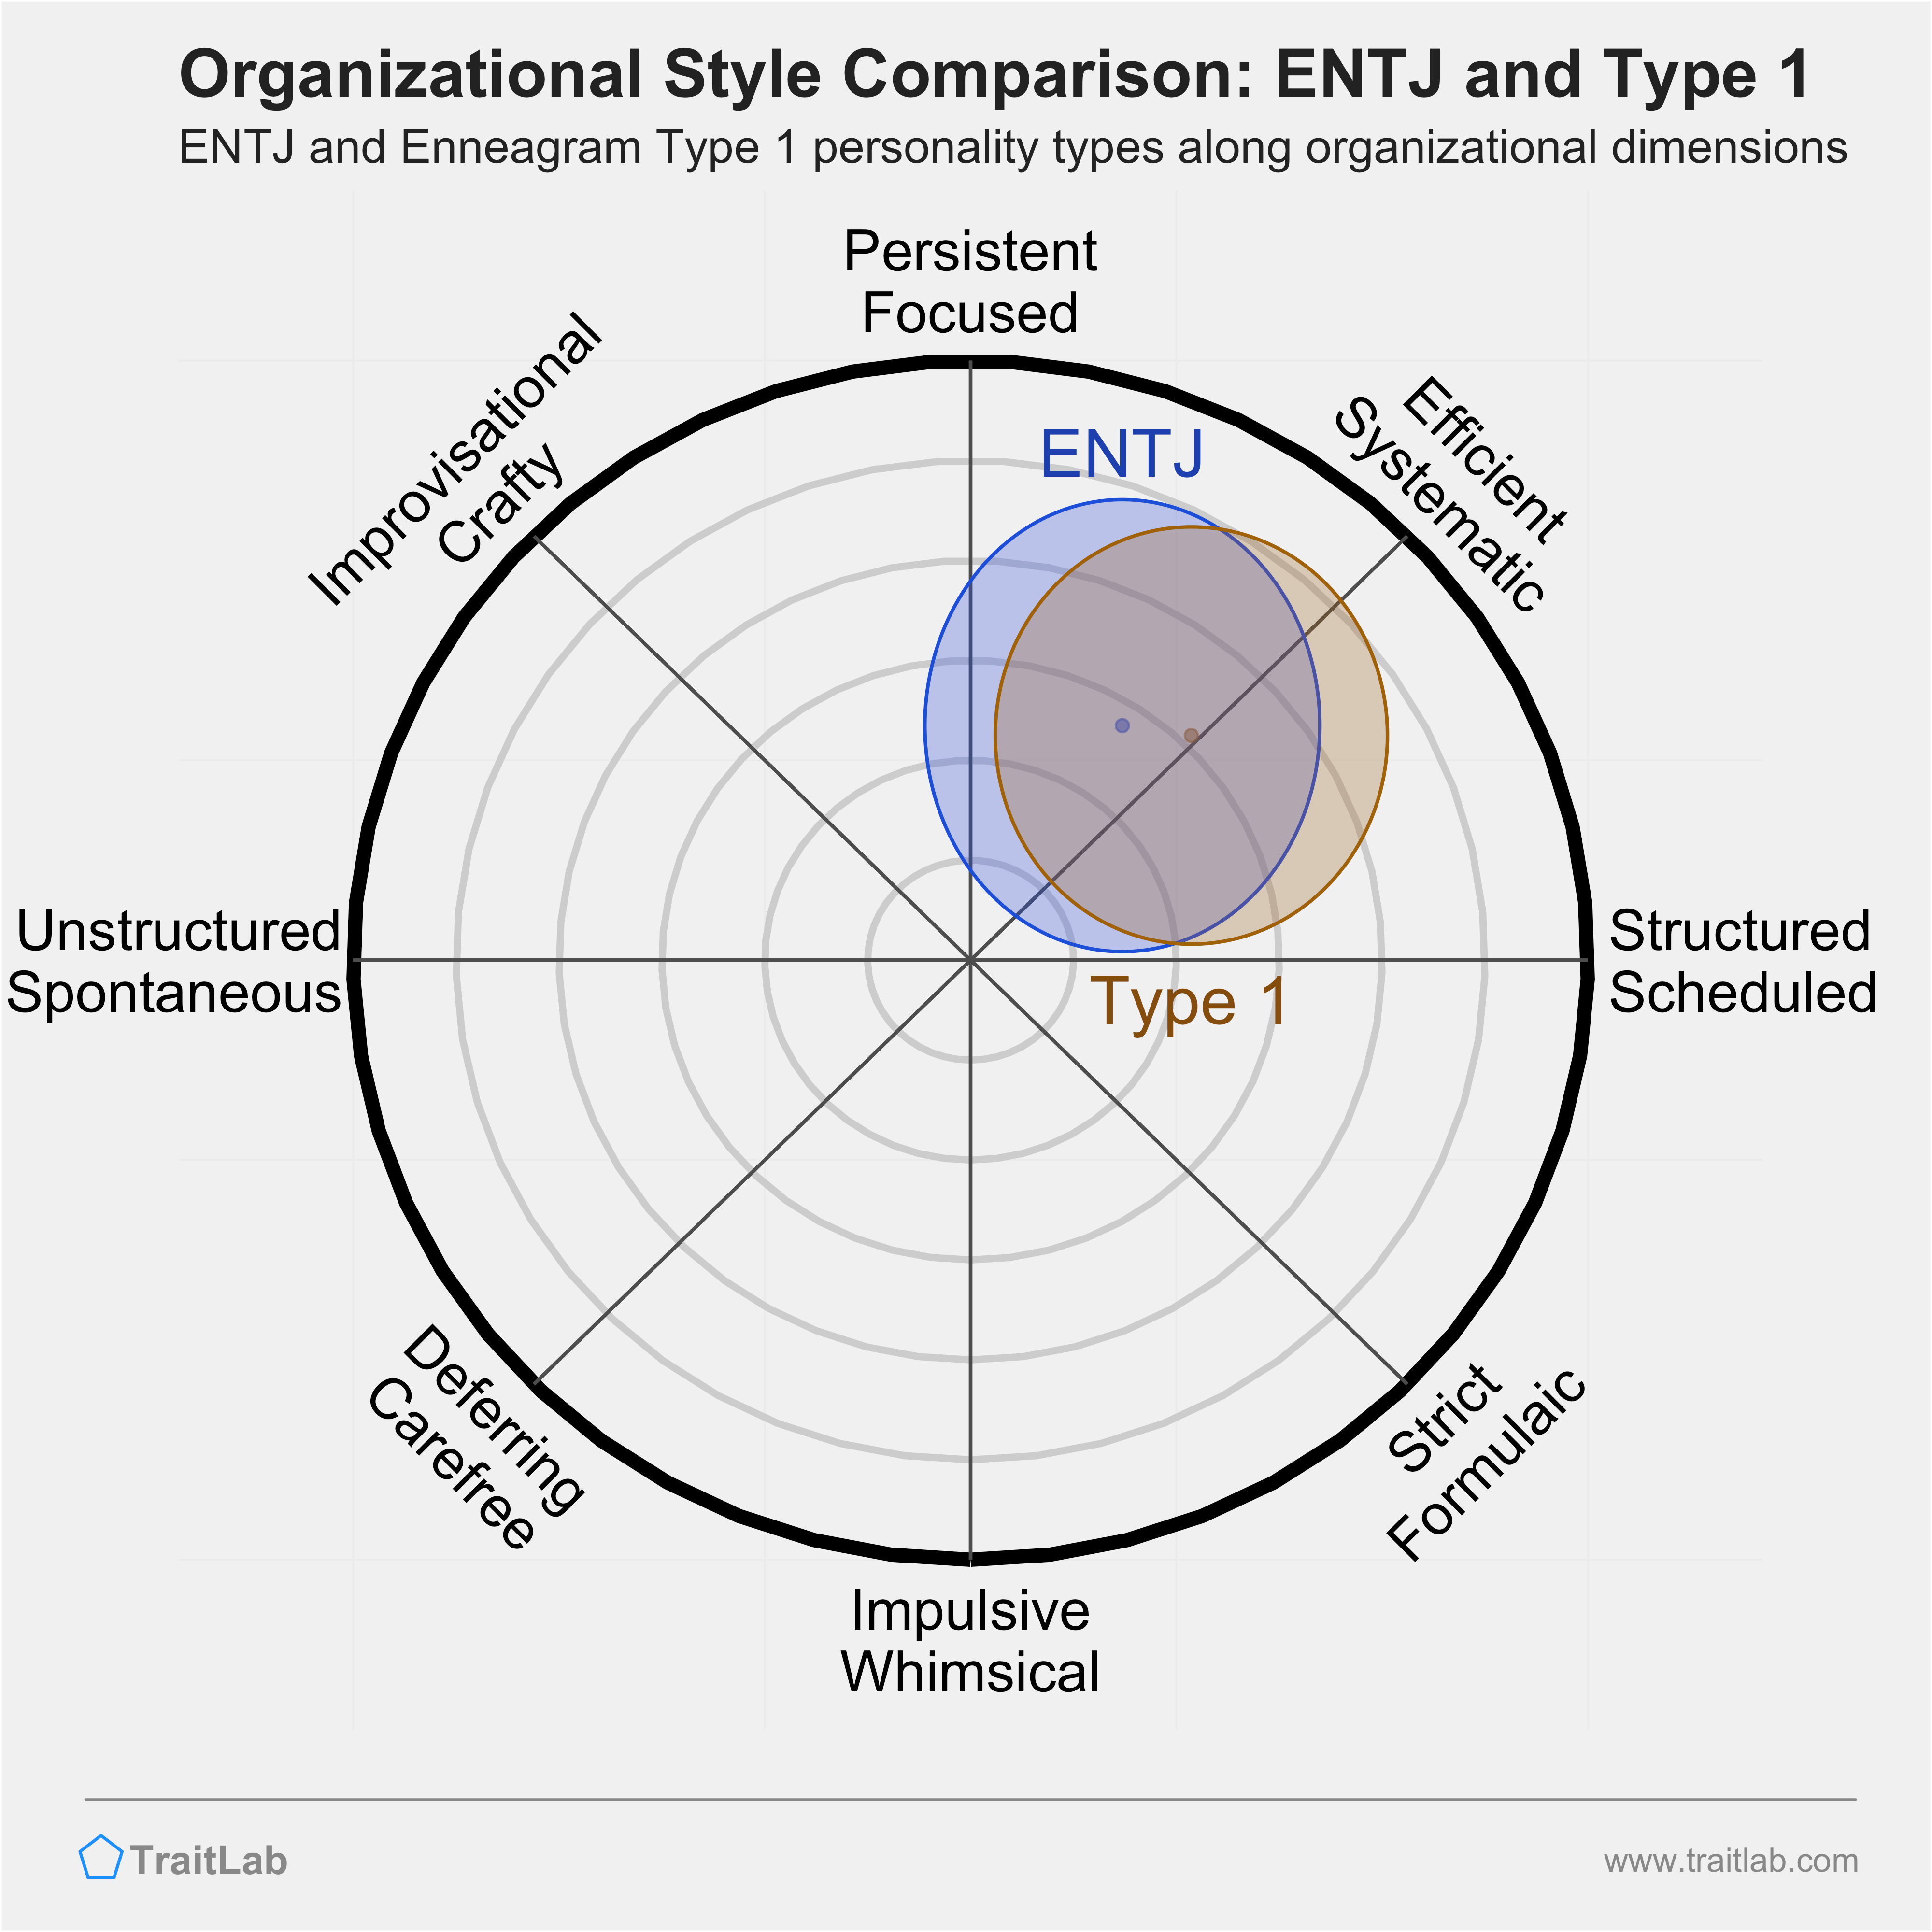 ENTJ and Type 1 comparison across organizational dimensions